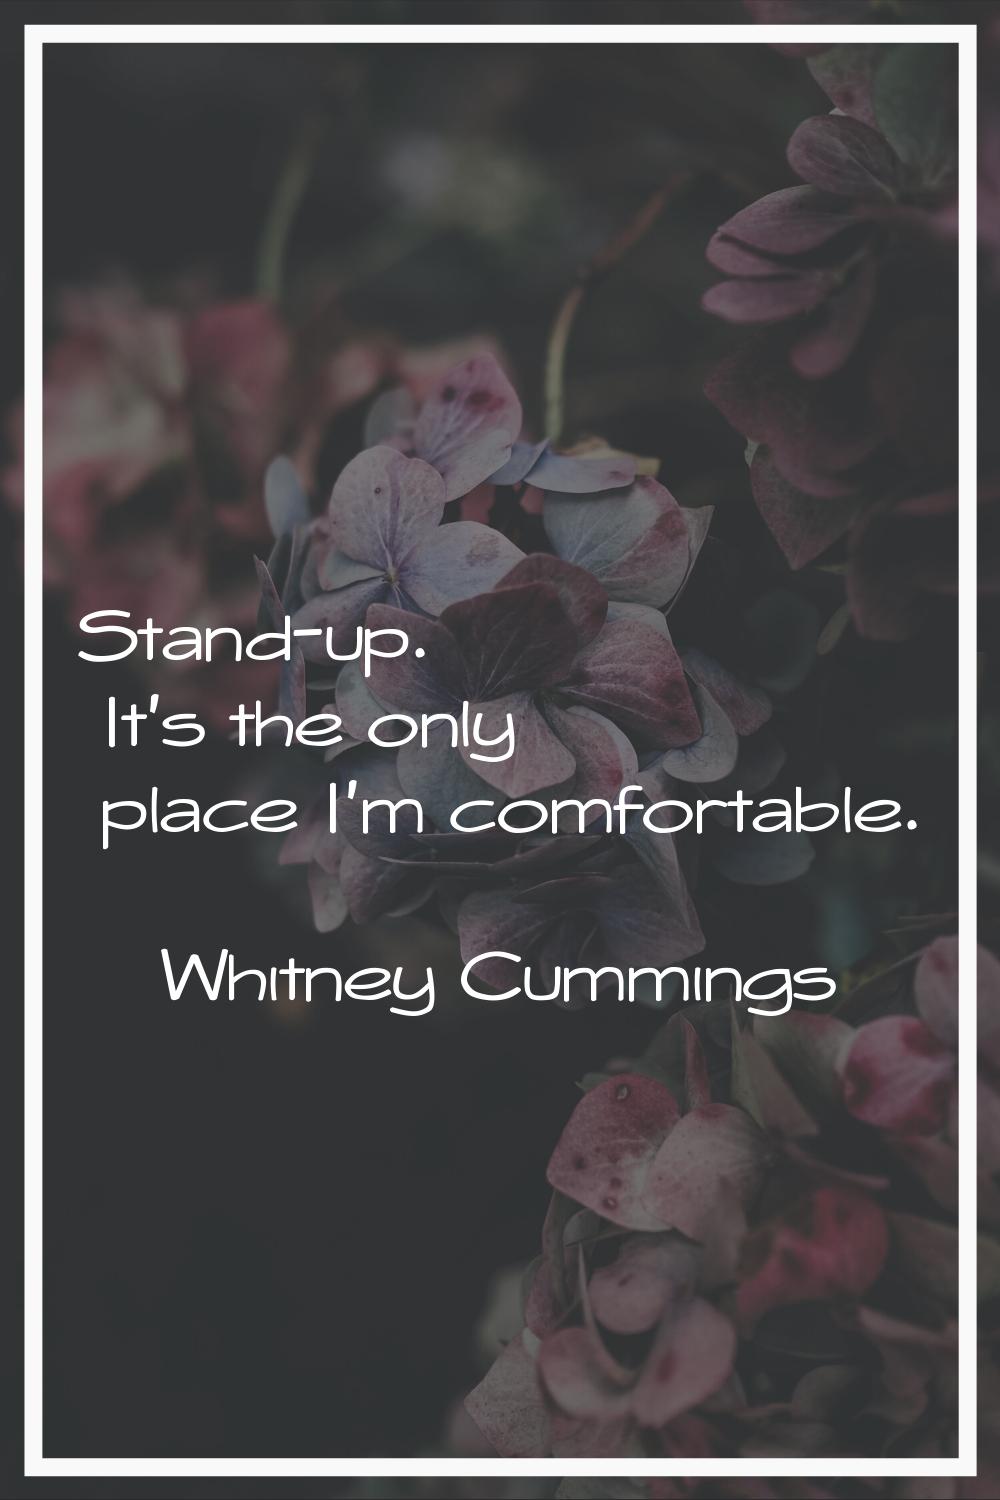 Stand-up. It's the only place I'm comfortable.